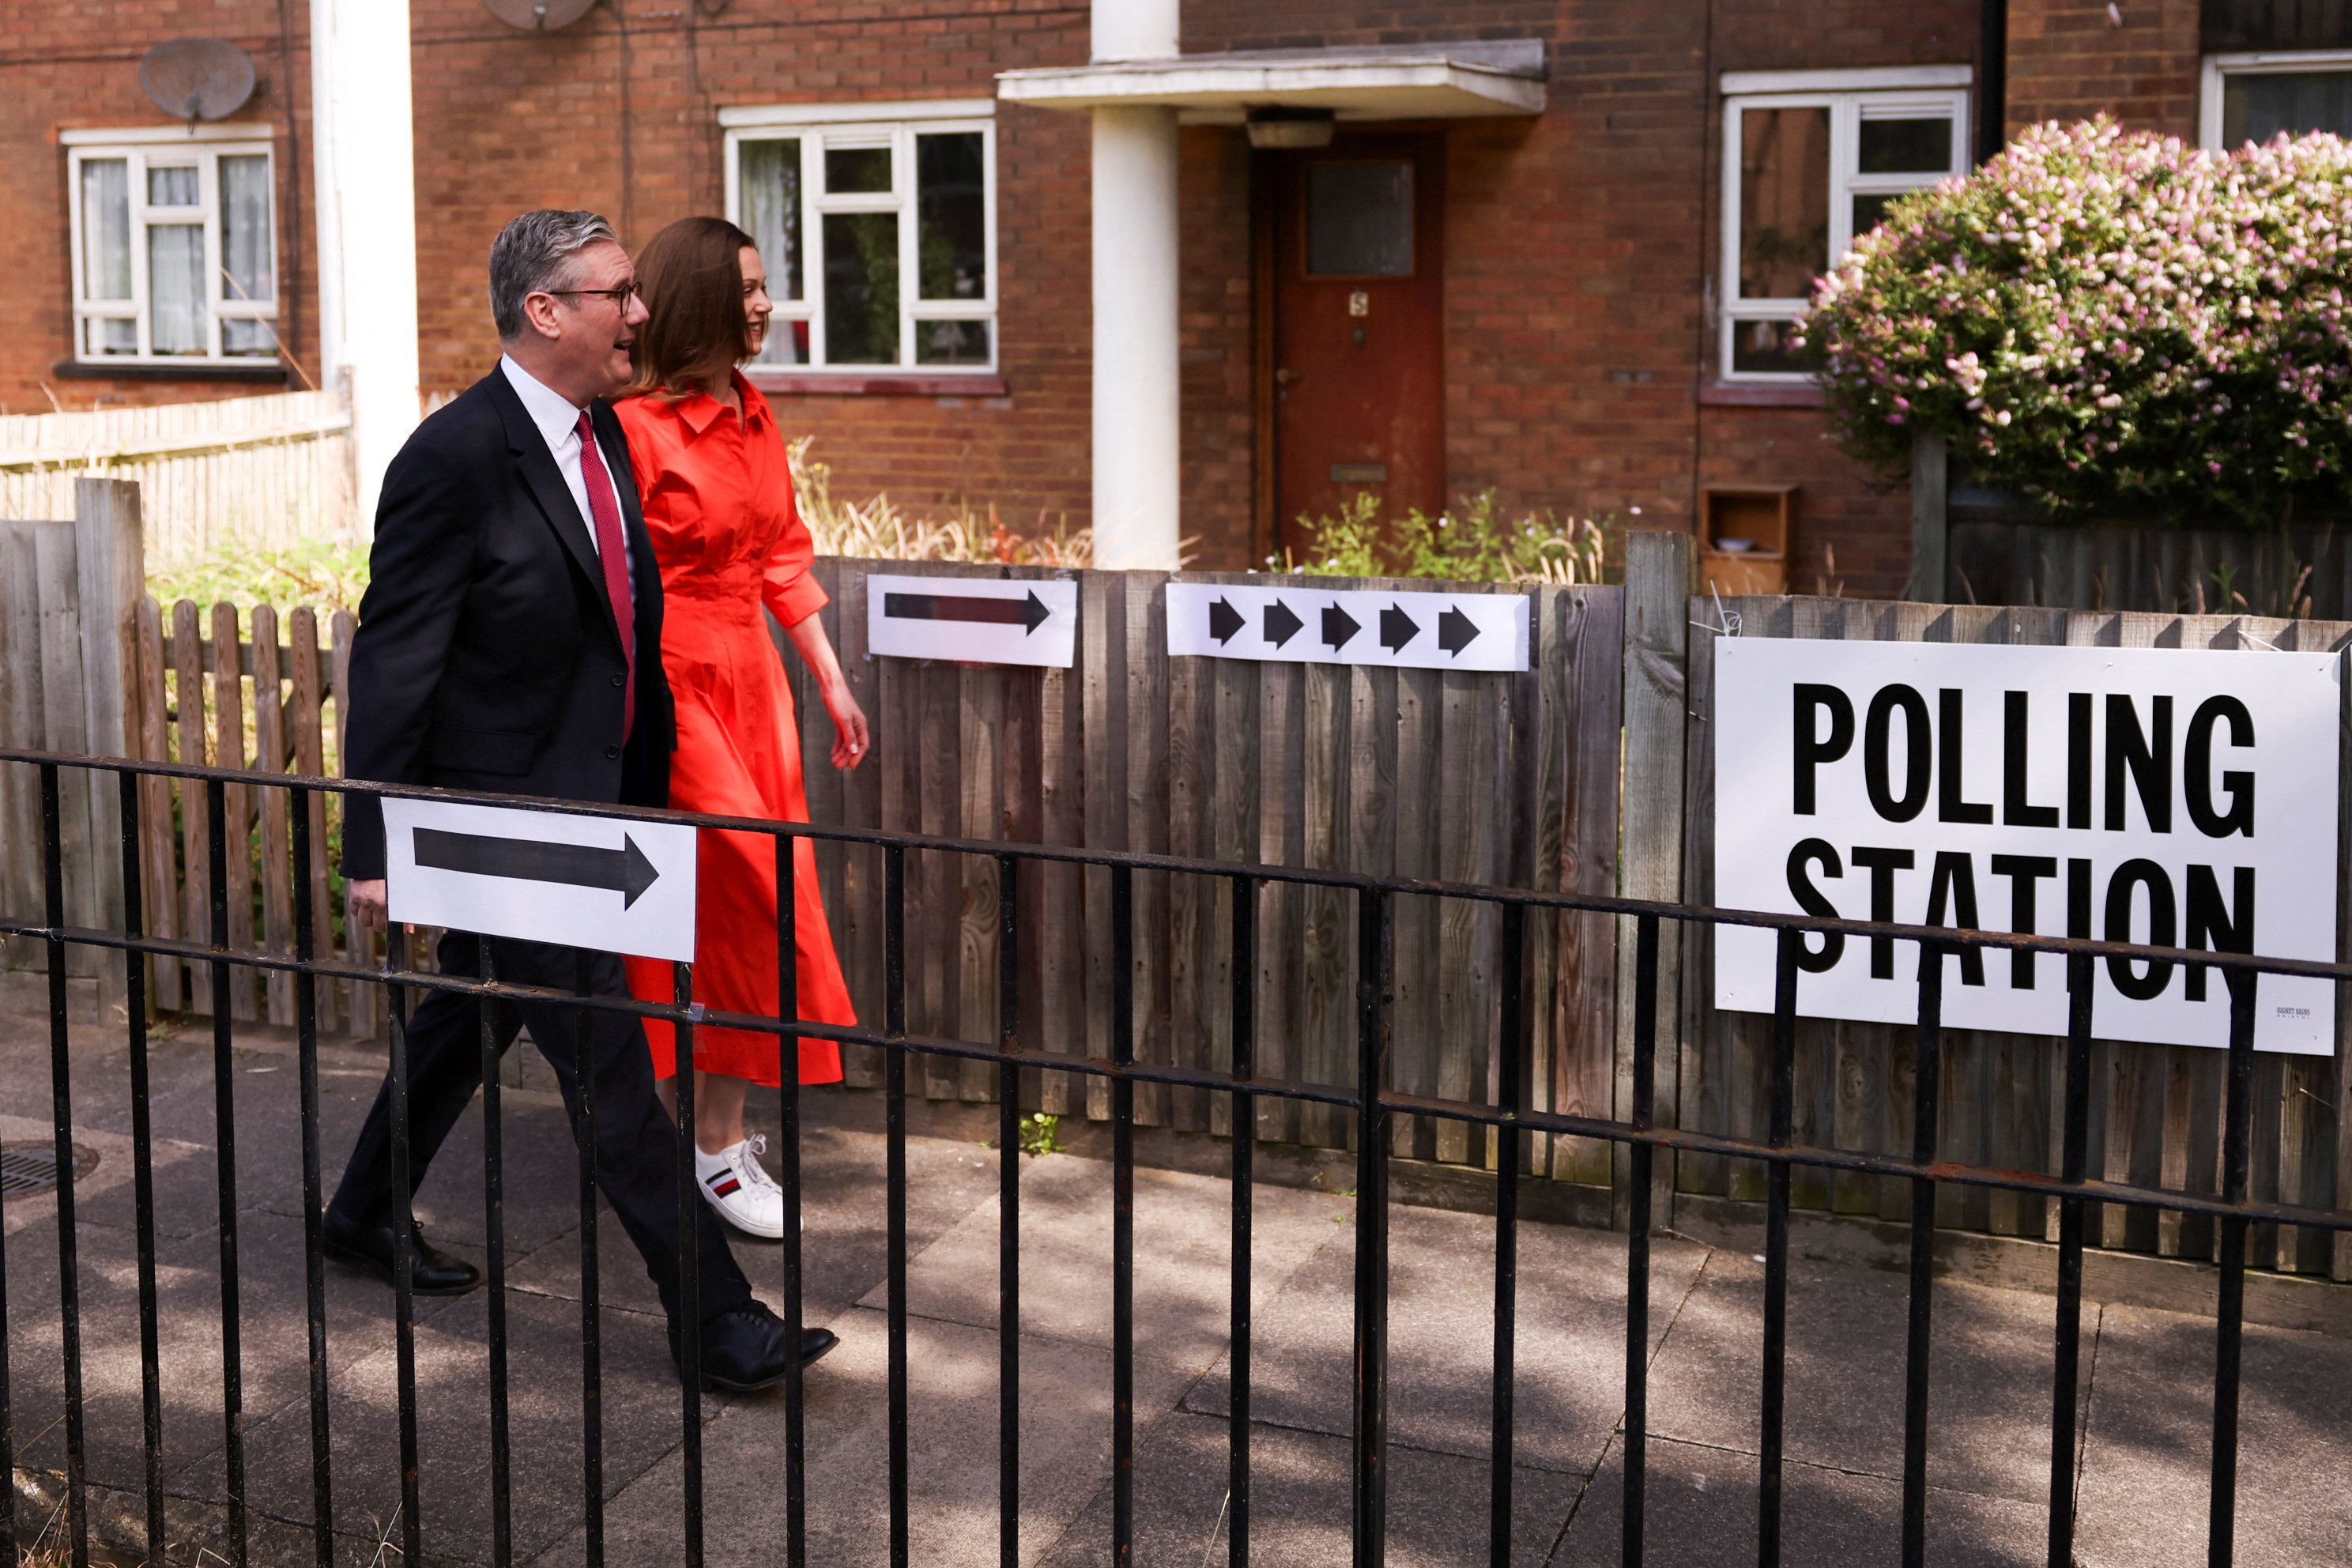 Britain’s opposition Labour Party leader Keir Starmer and his wife Victoria Starmer outside a polling station in London. Photo: Reuters